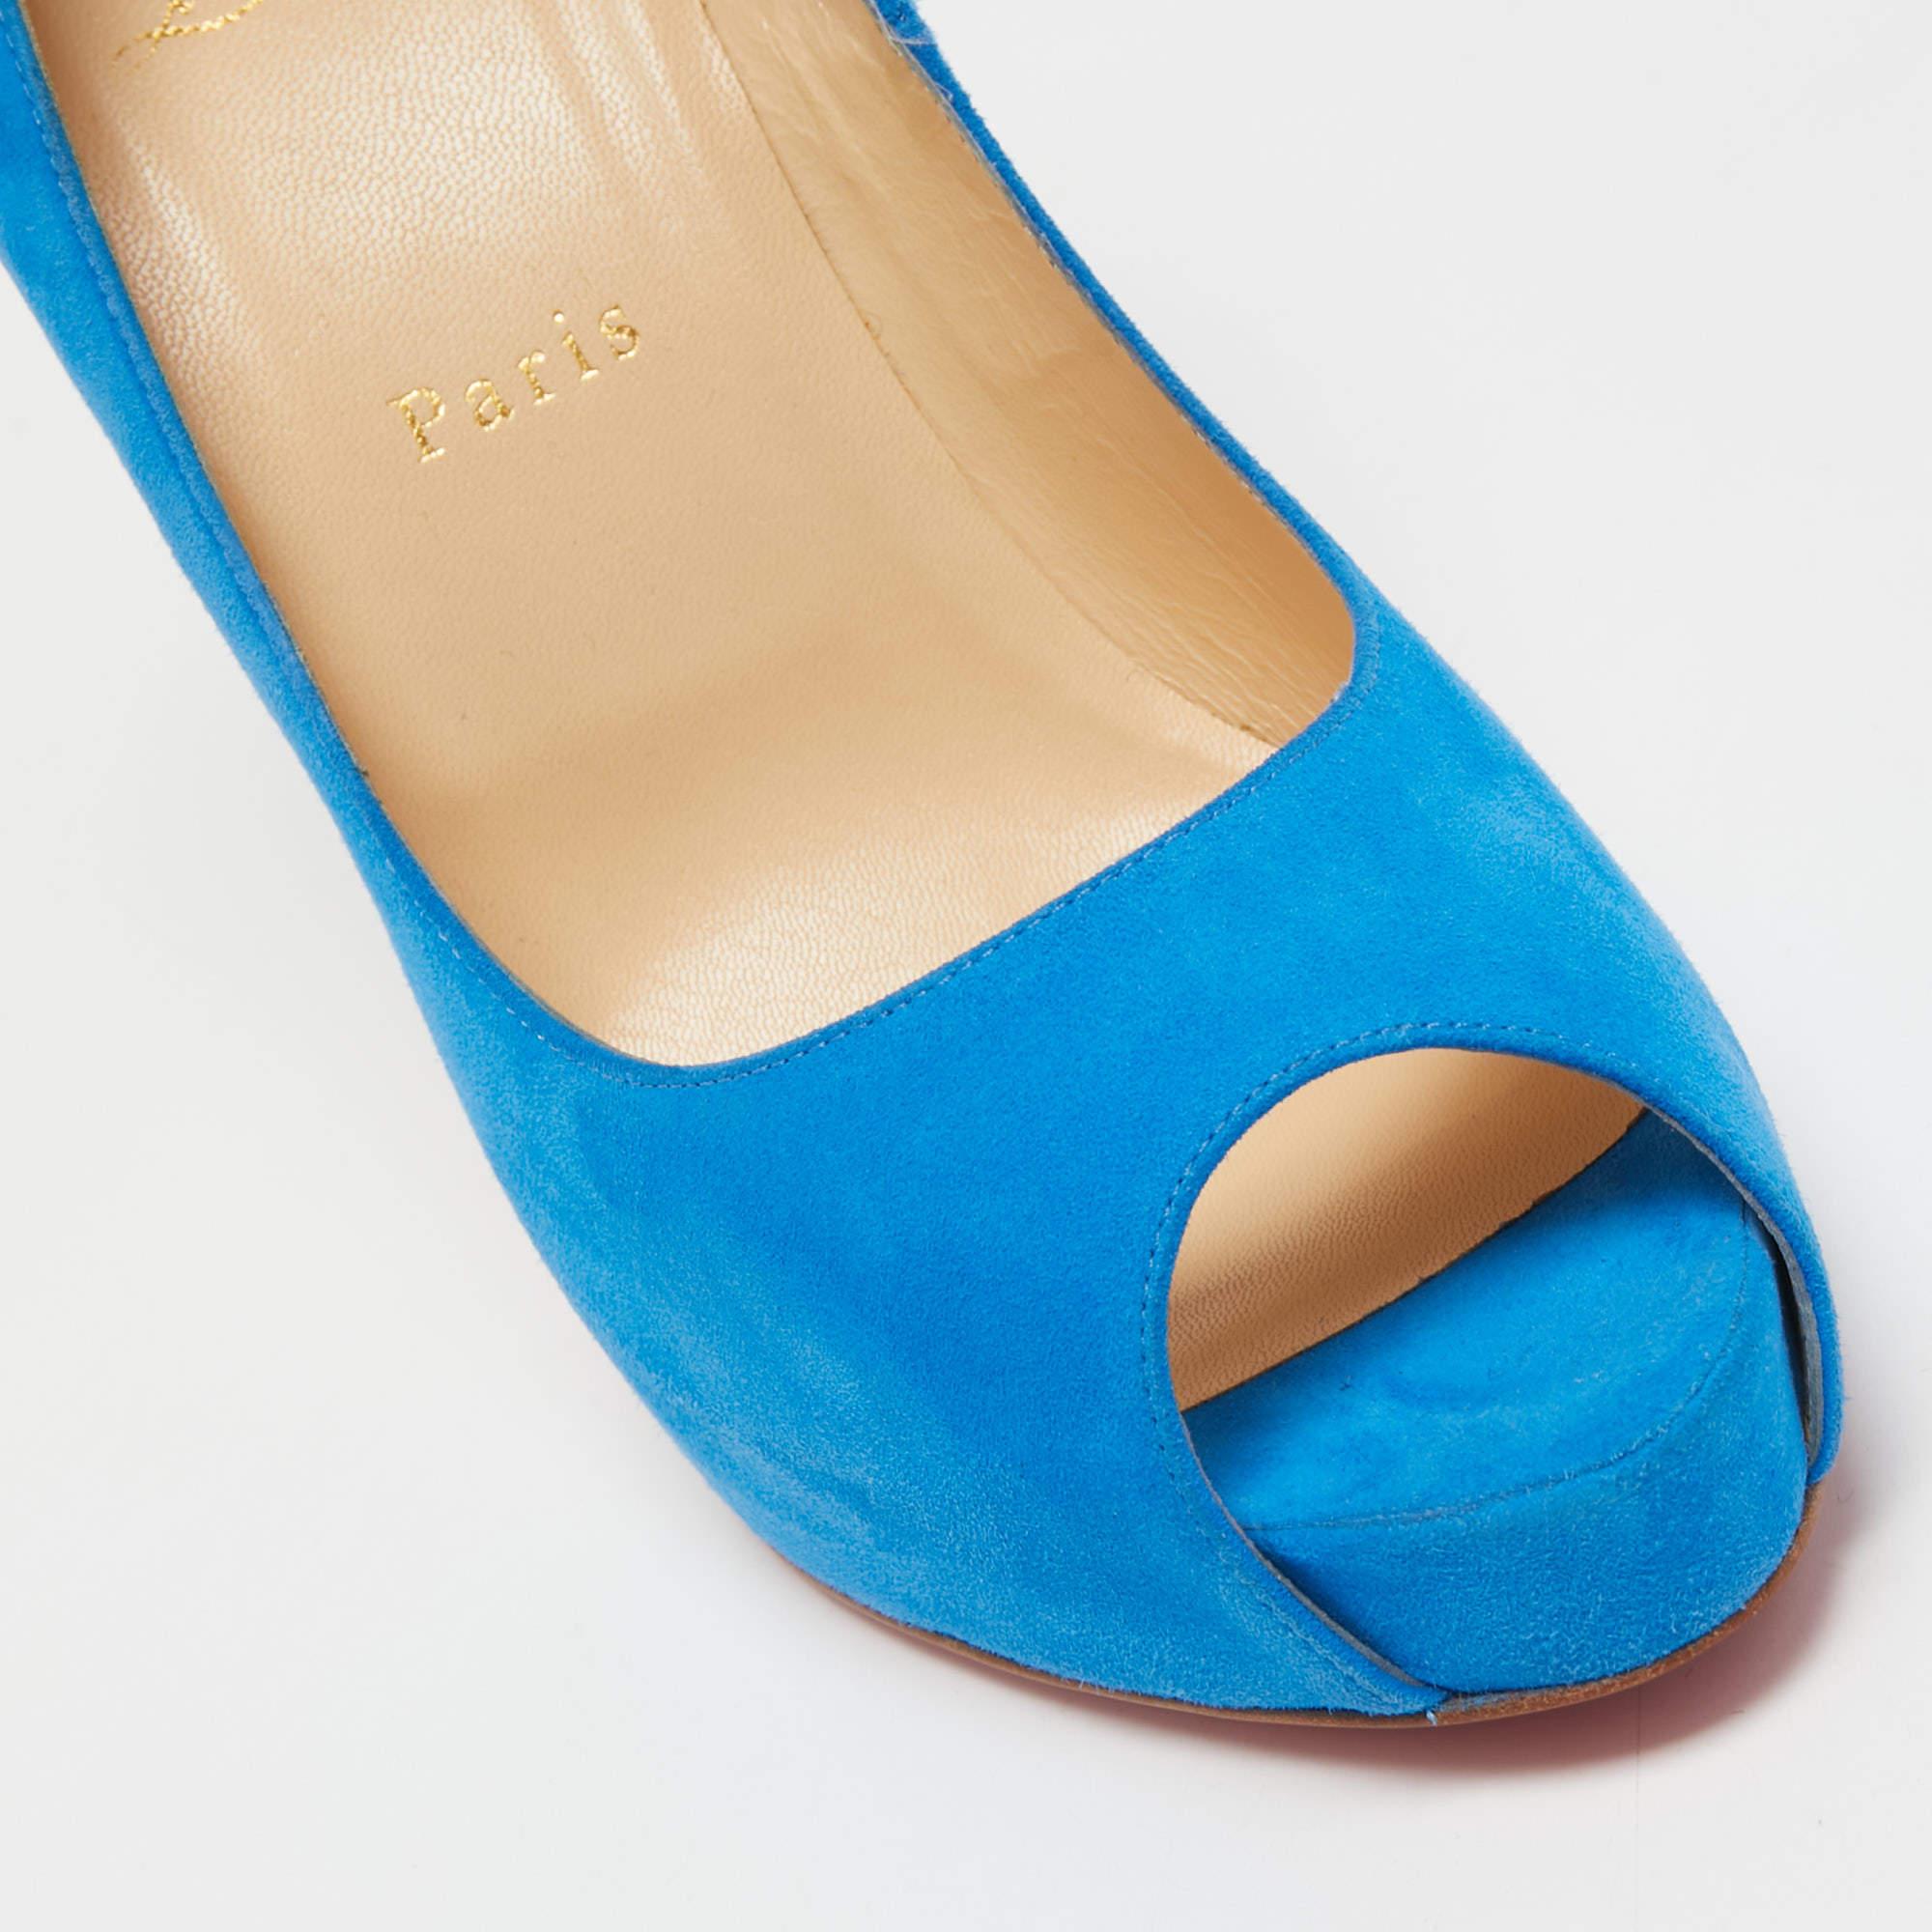 Christian Louboutin Blue Suede New Very Prive Pumps Size 40.5 3